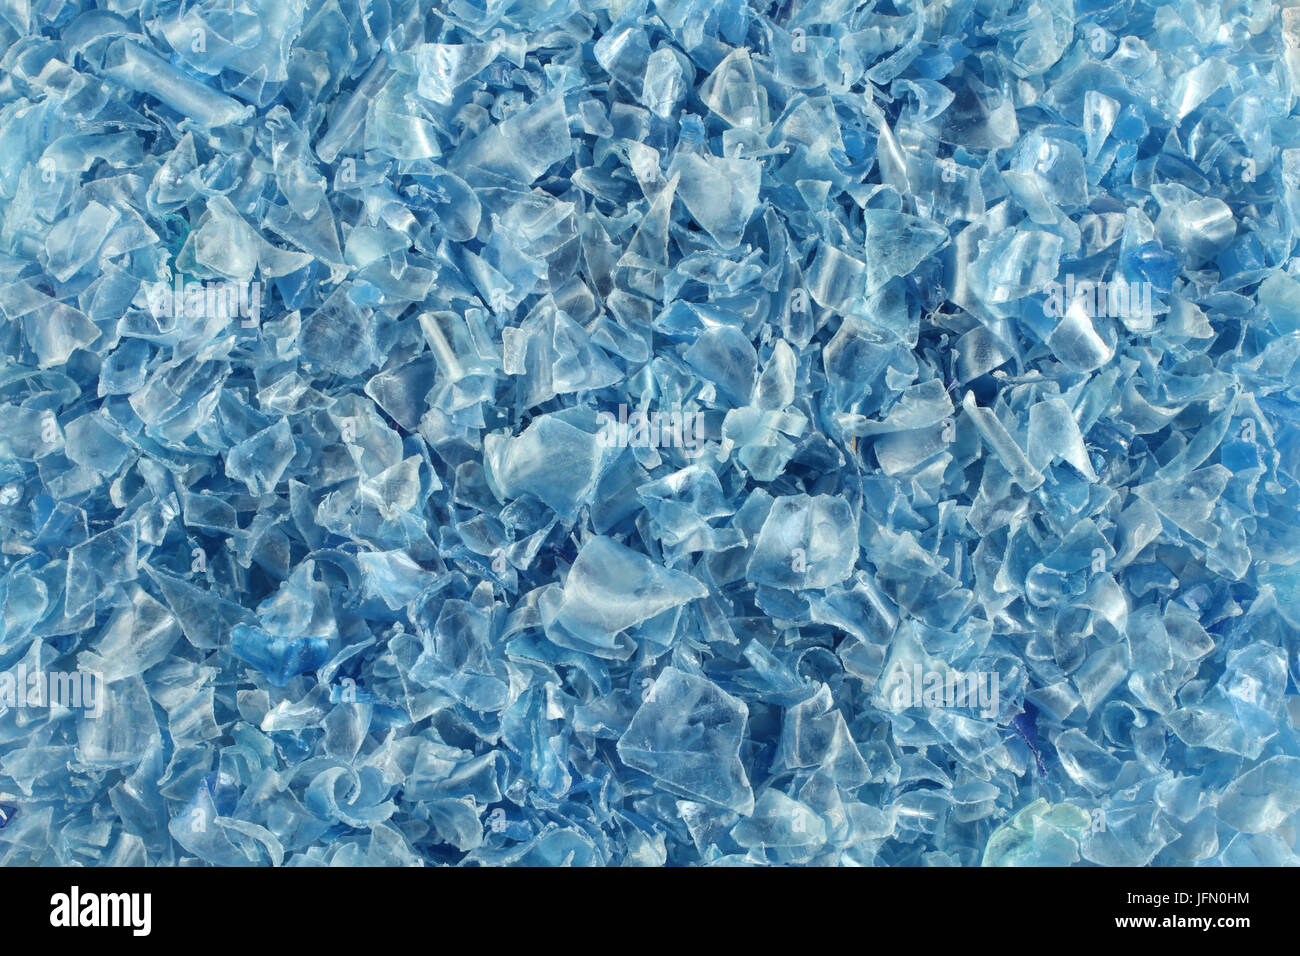 Small pieces of cut blue plastic bottles Stock Photo